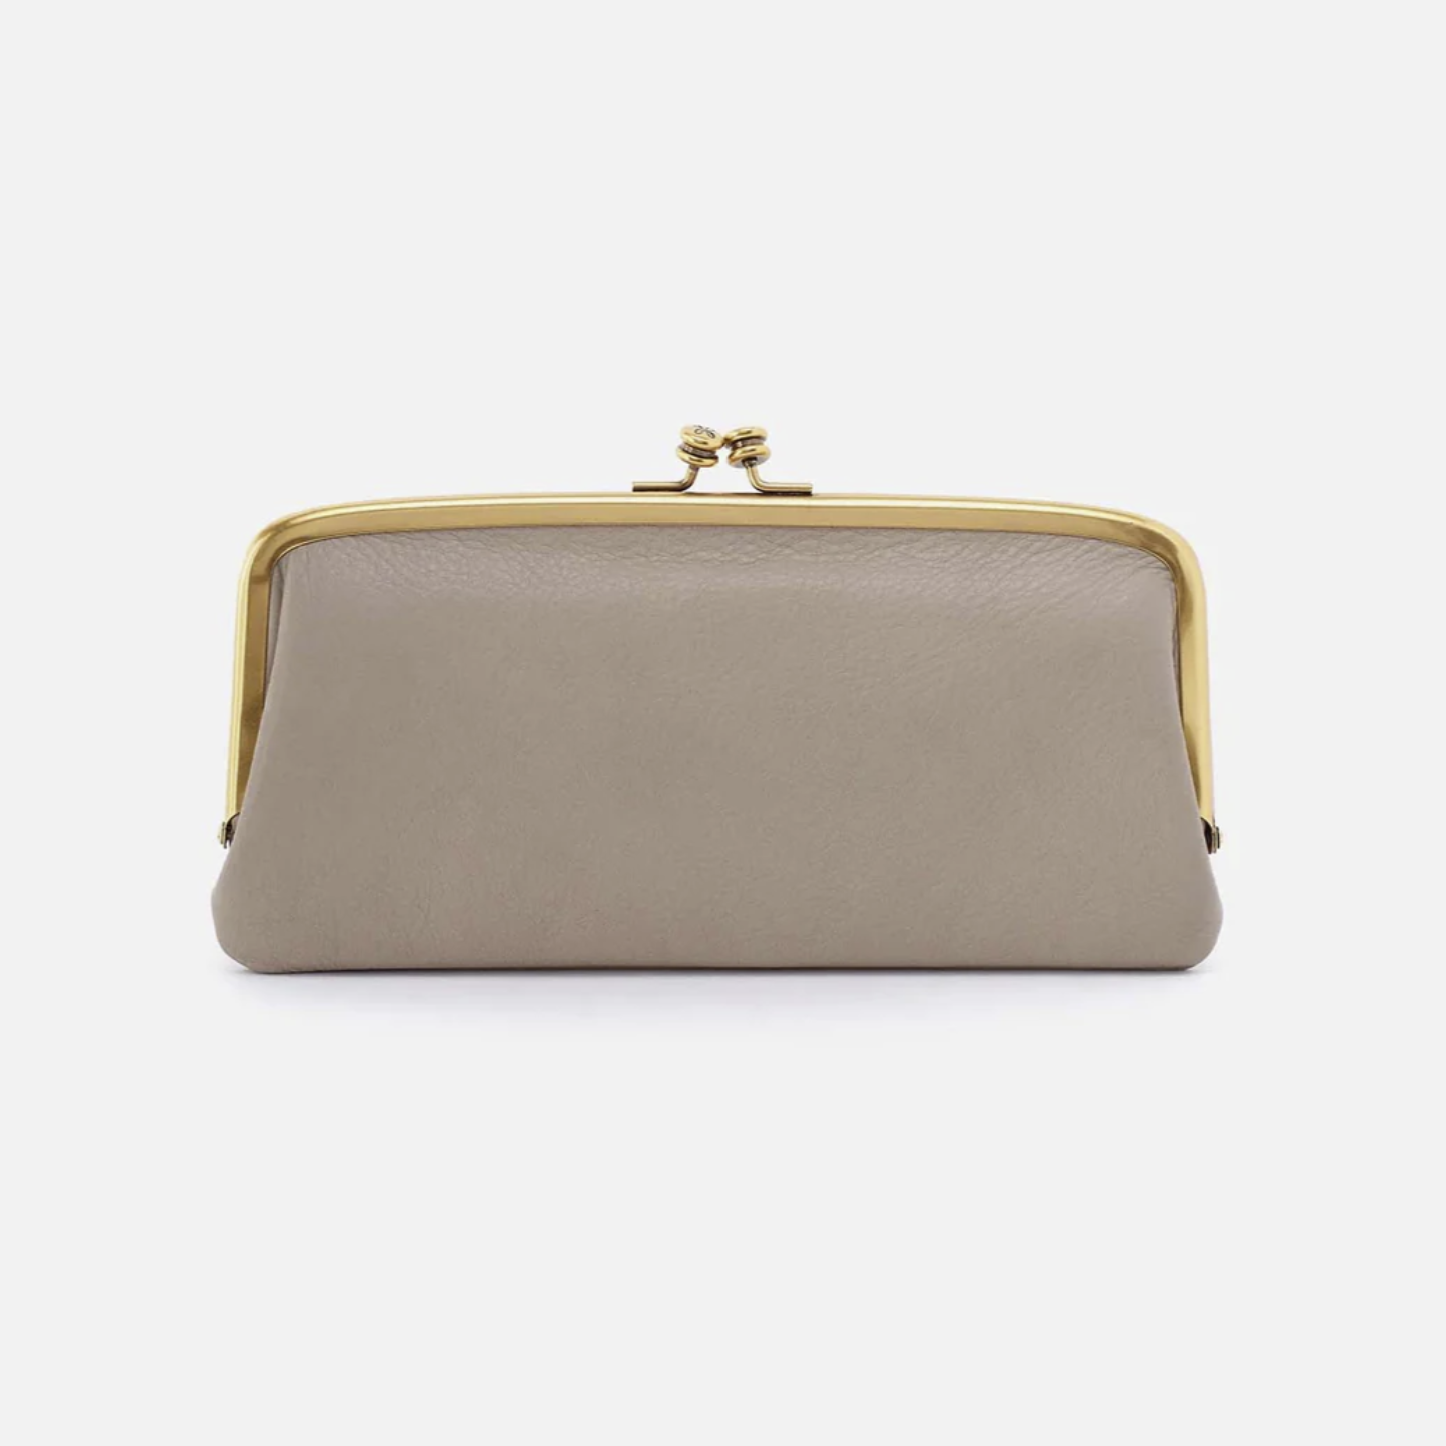 Hobo Cora Large Frame Wallet in Taupe